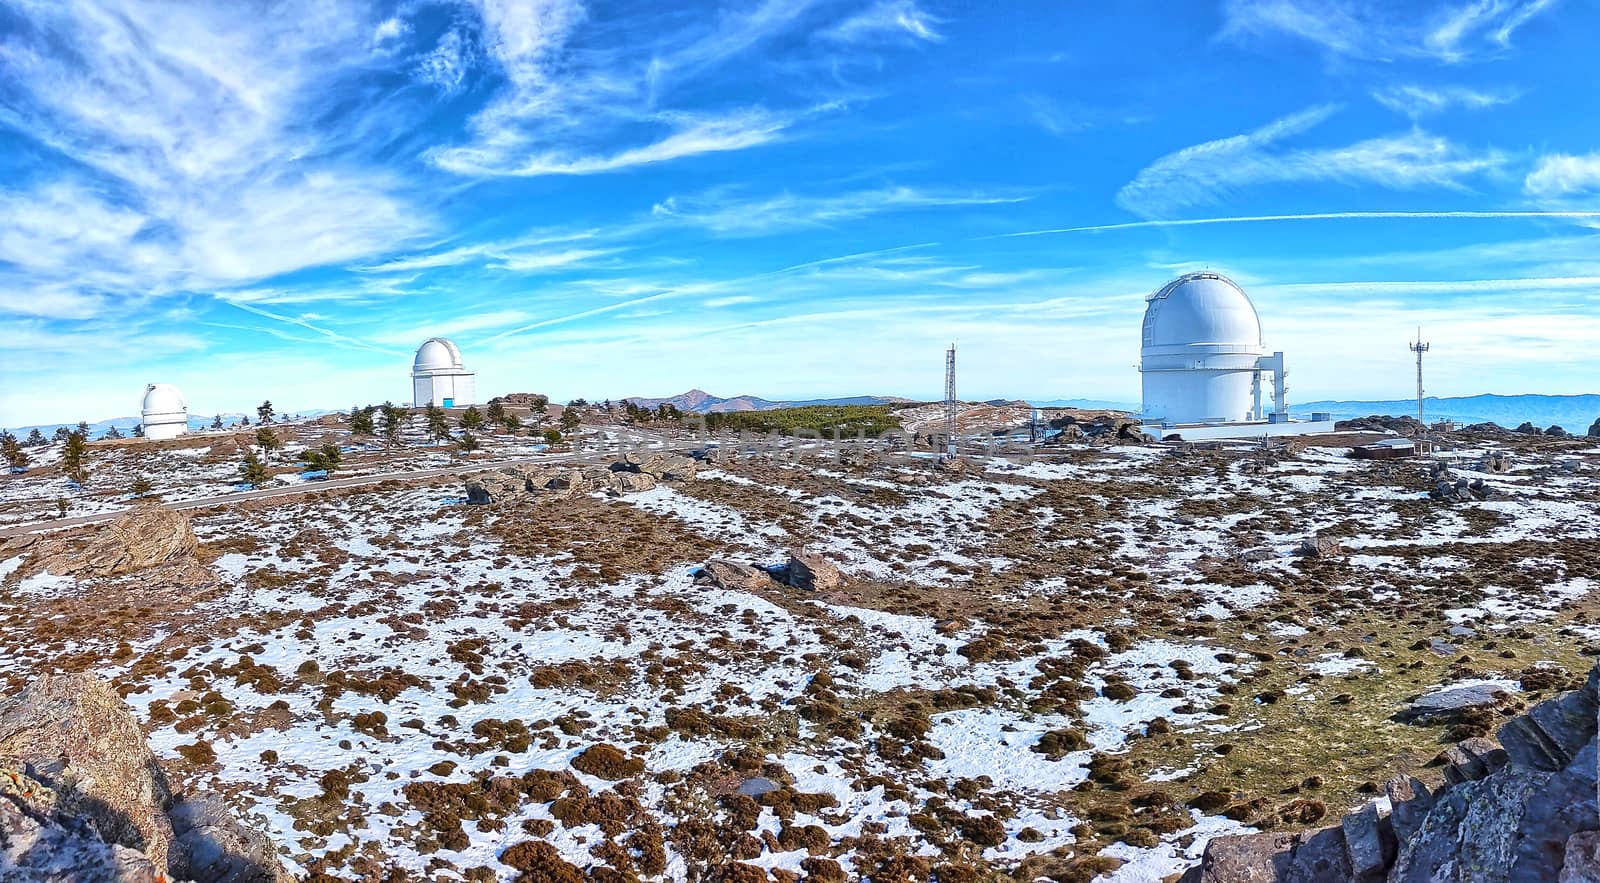 Panoramic of Calar Alto Observatory at the snowy mountain top in Almeria, Andalusia, Spain, 2019. Sky passing through against the domes